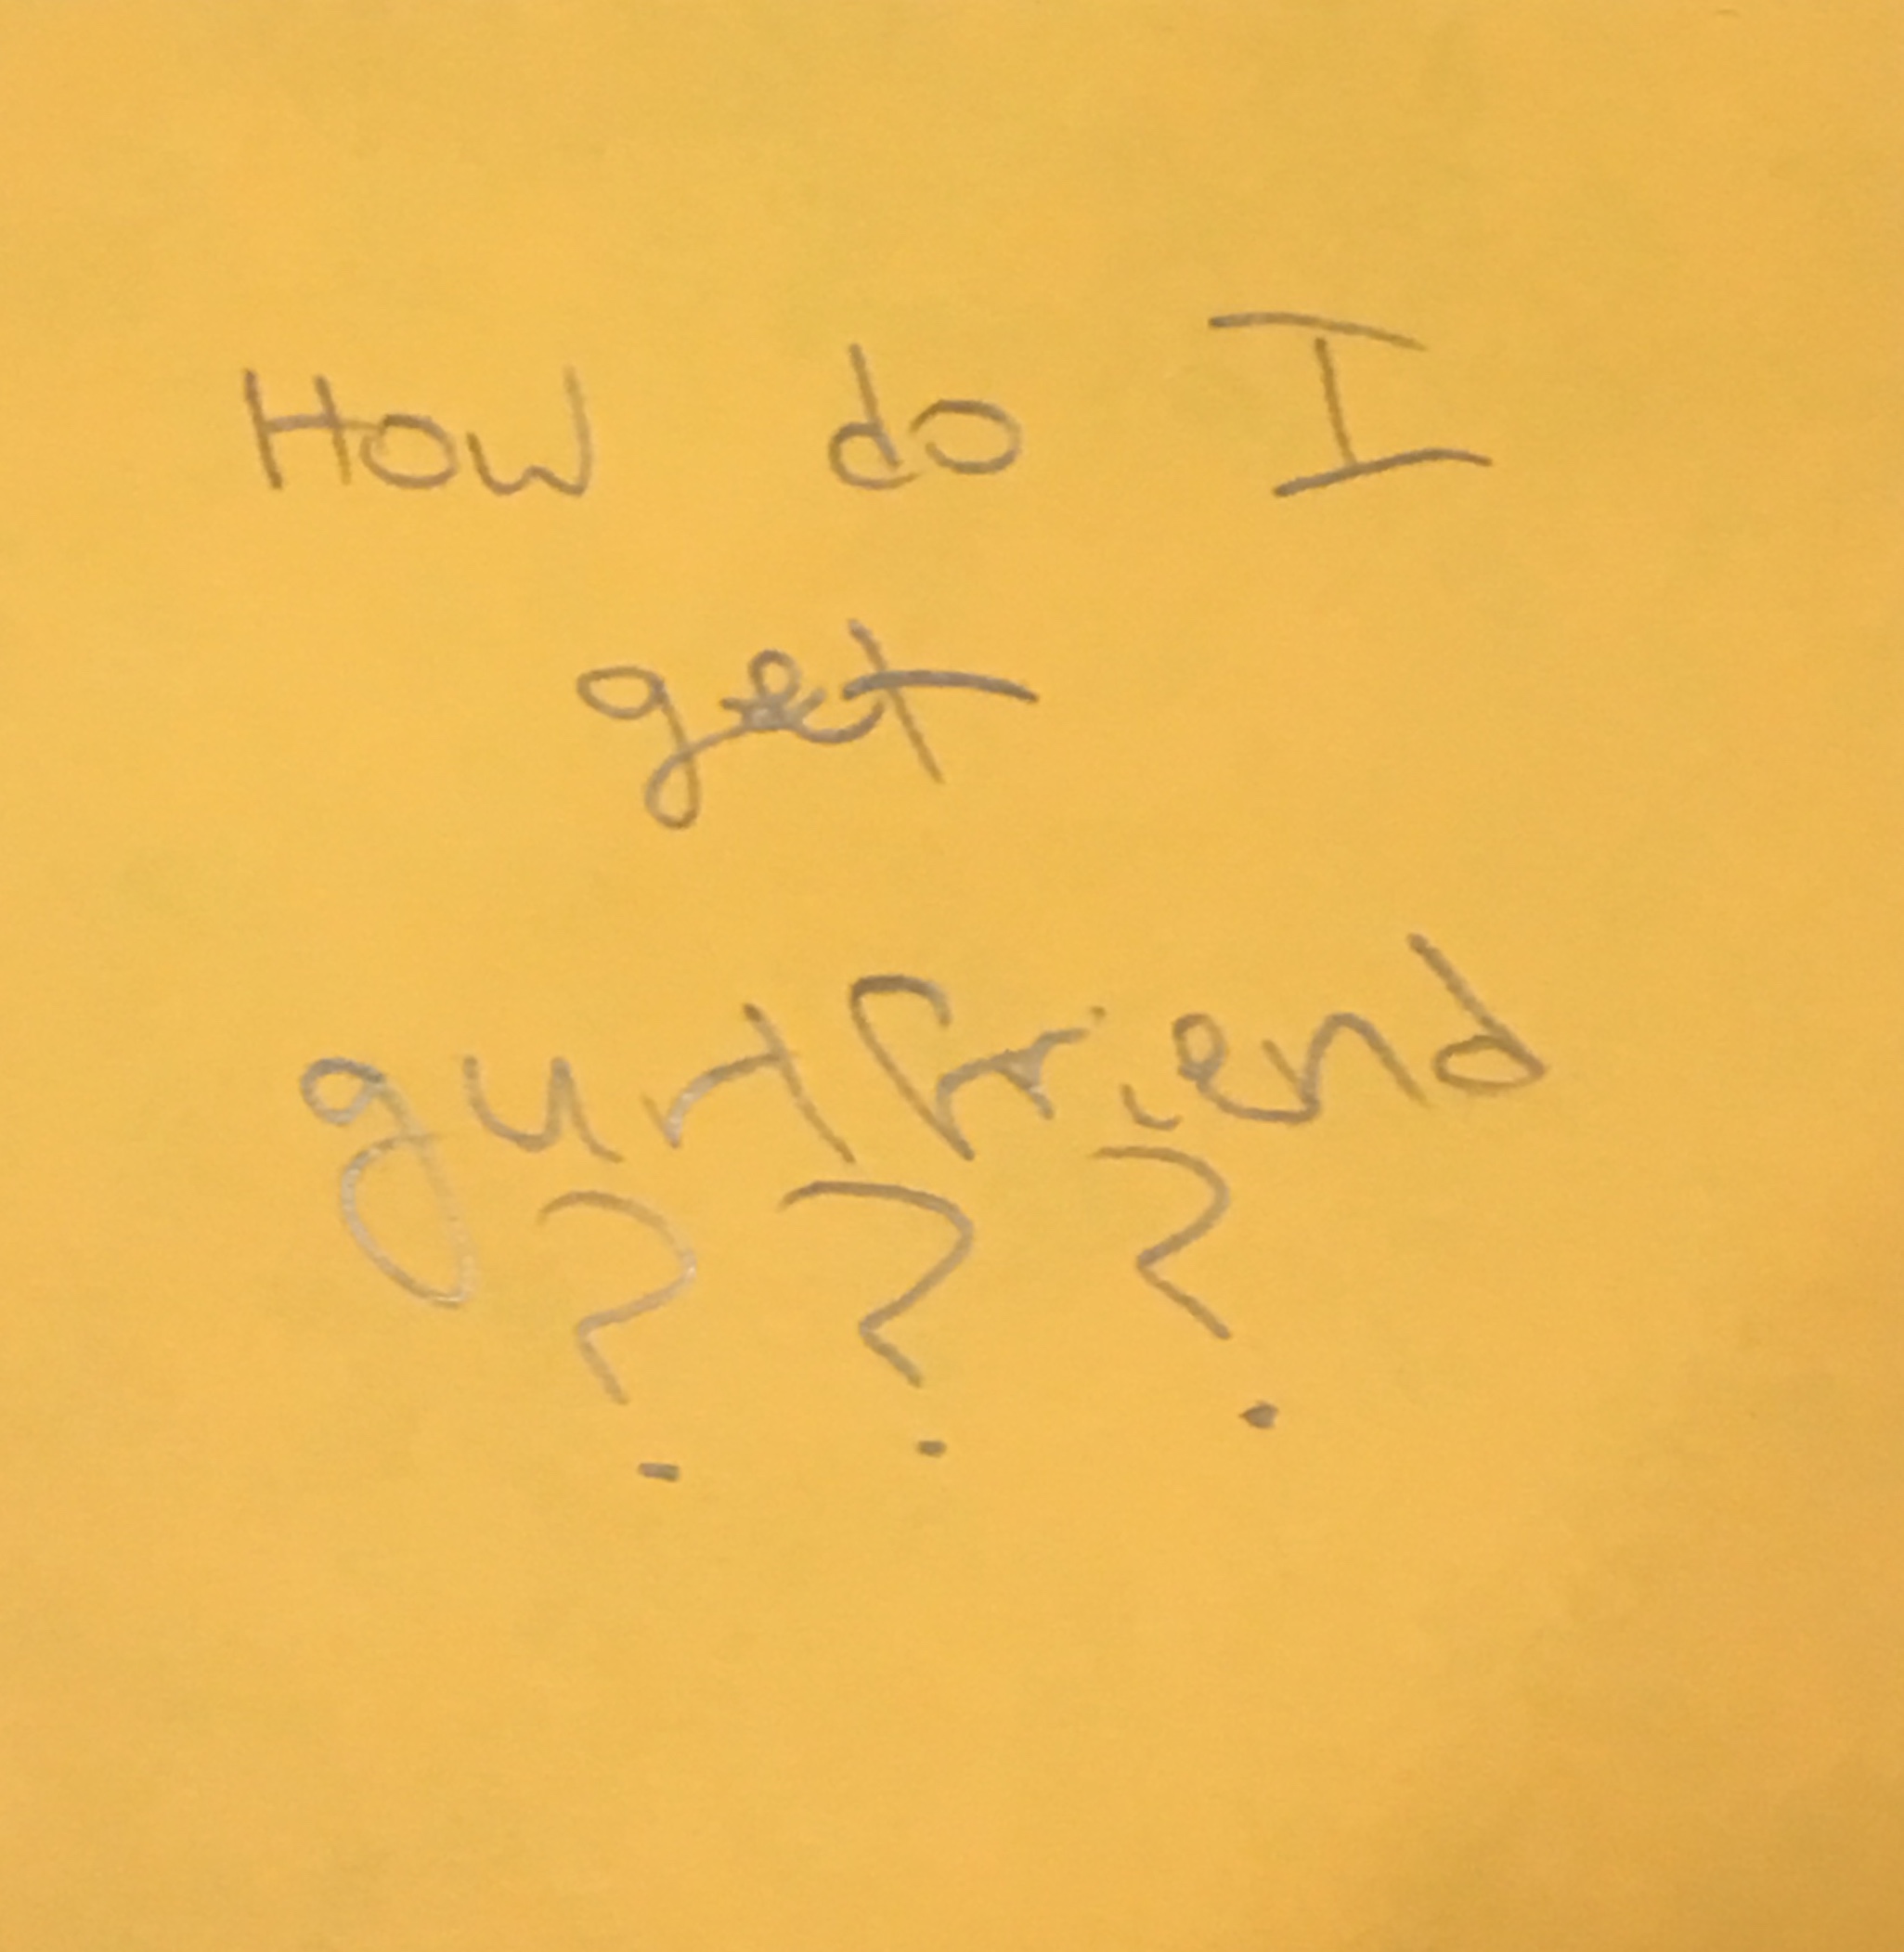 how-do-i-get-gurlfriend-the-answer-wall